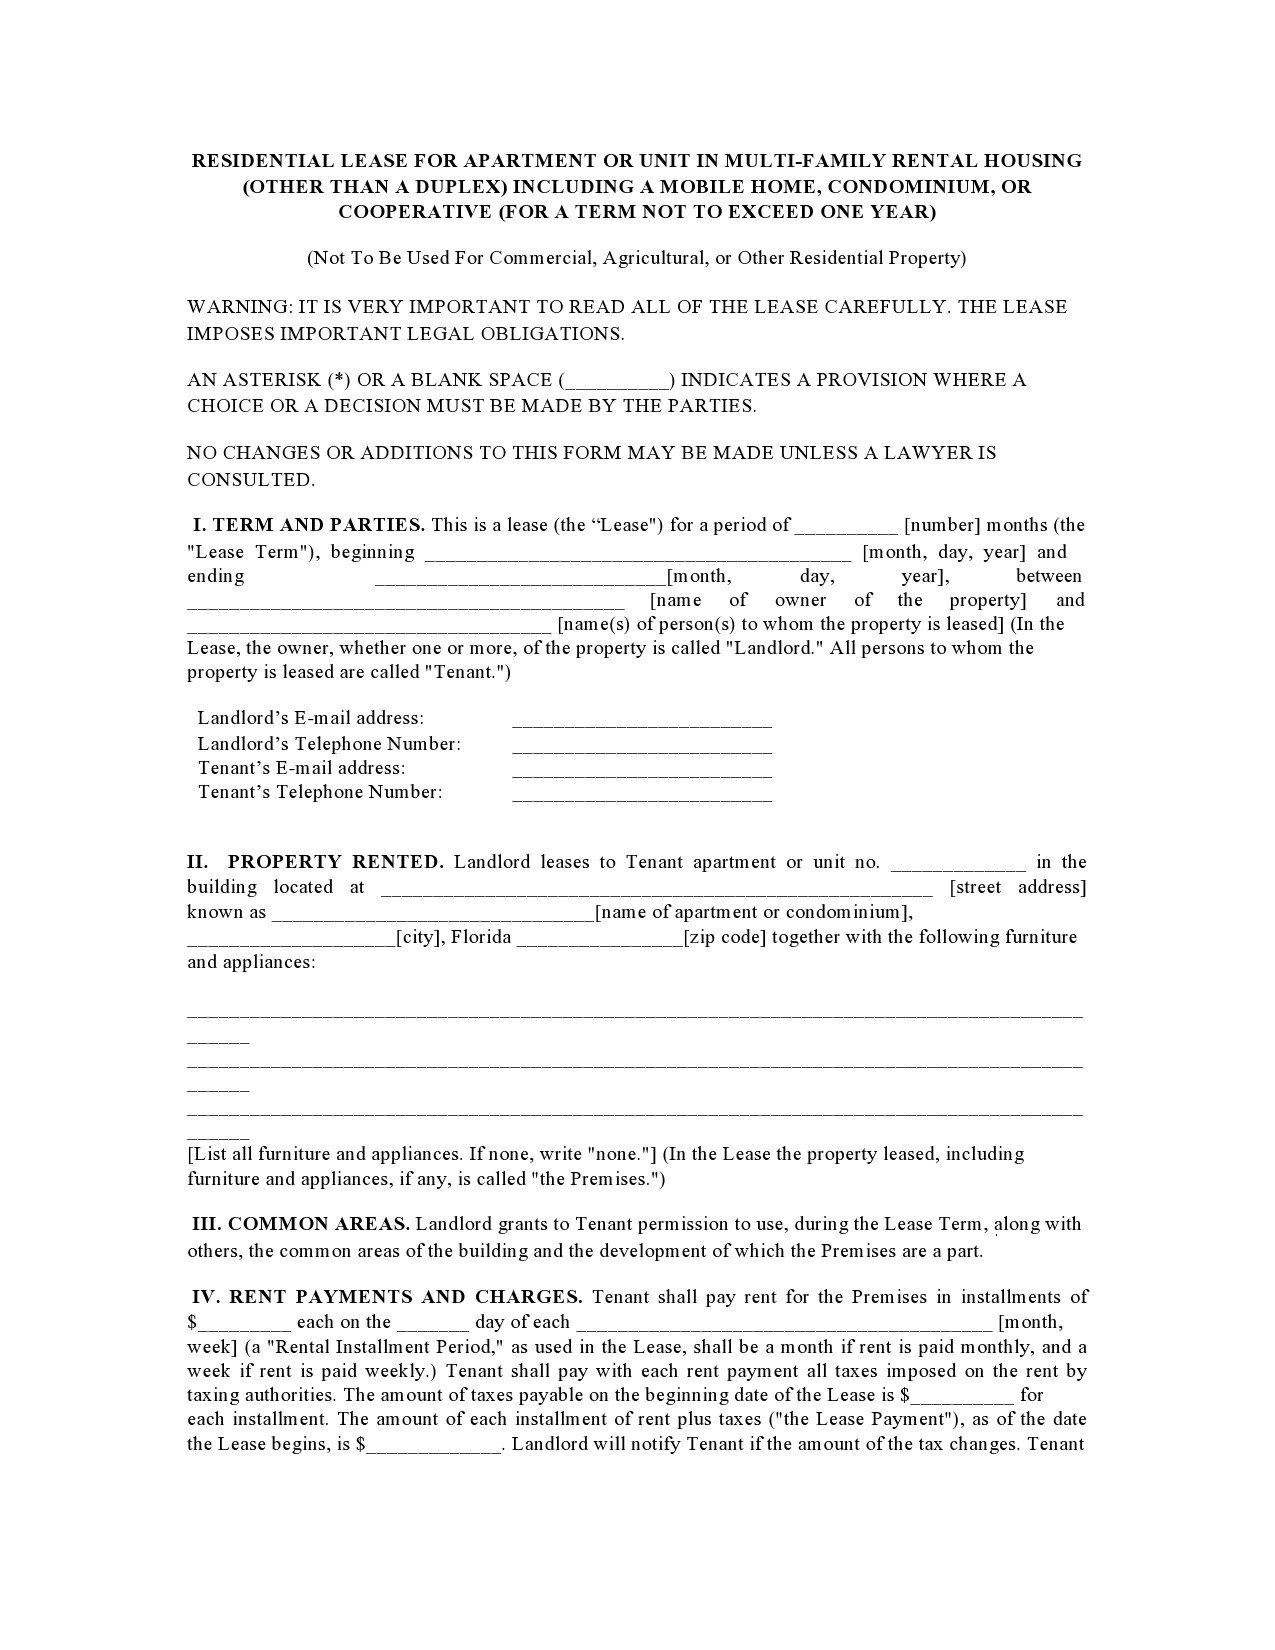 Free residential lease agreement 30